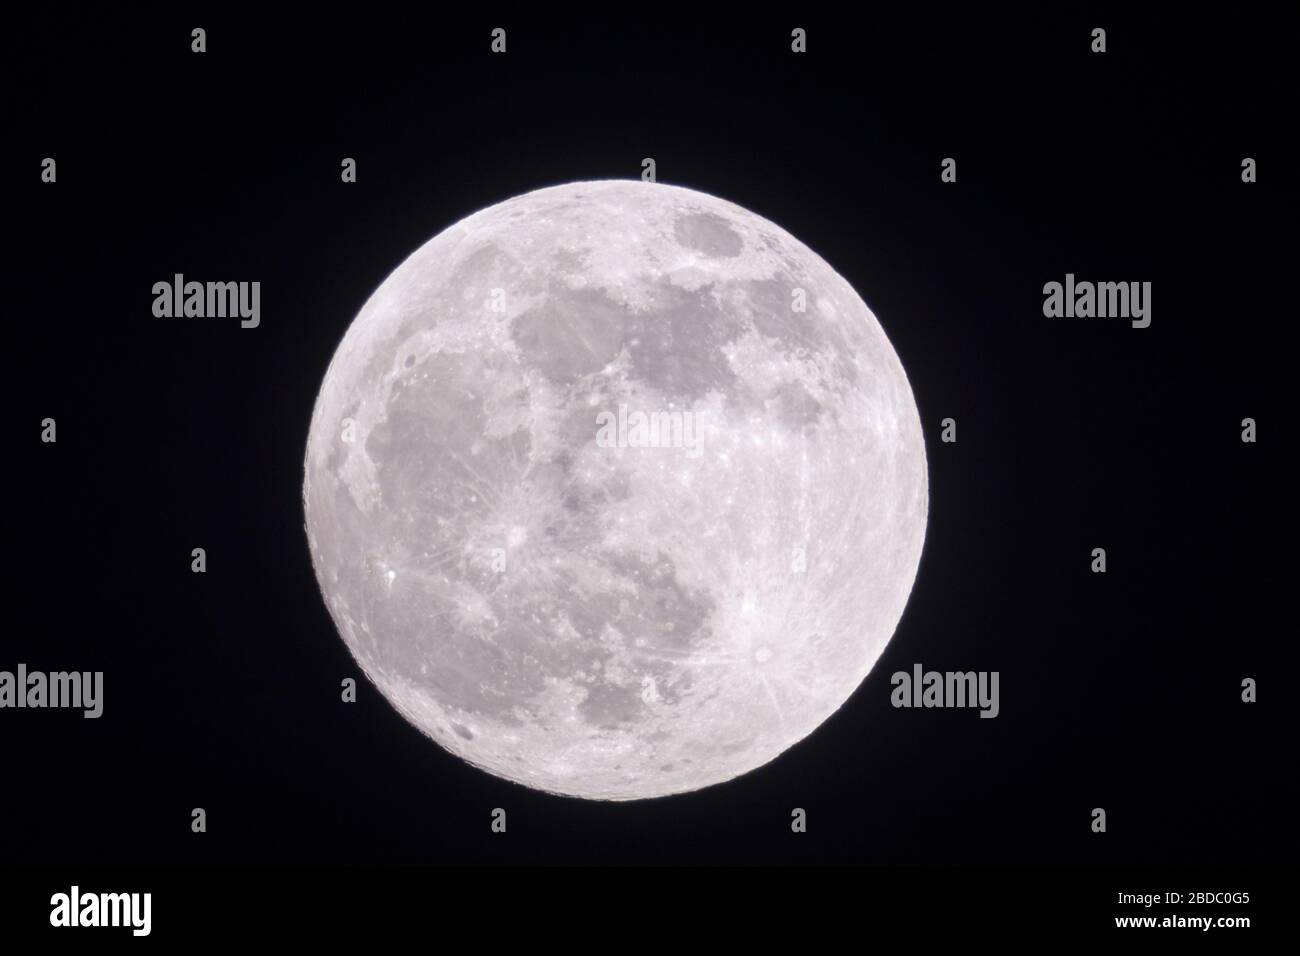 Full moon, fullmoon is shining bright , silver light, close, clear dark winter night, looks close, supermoon, detailed view, January, 2019. Stock Photo